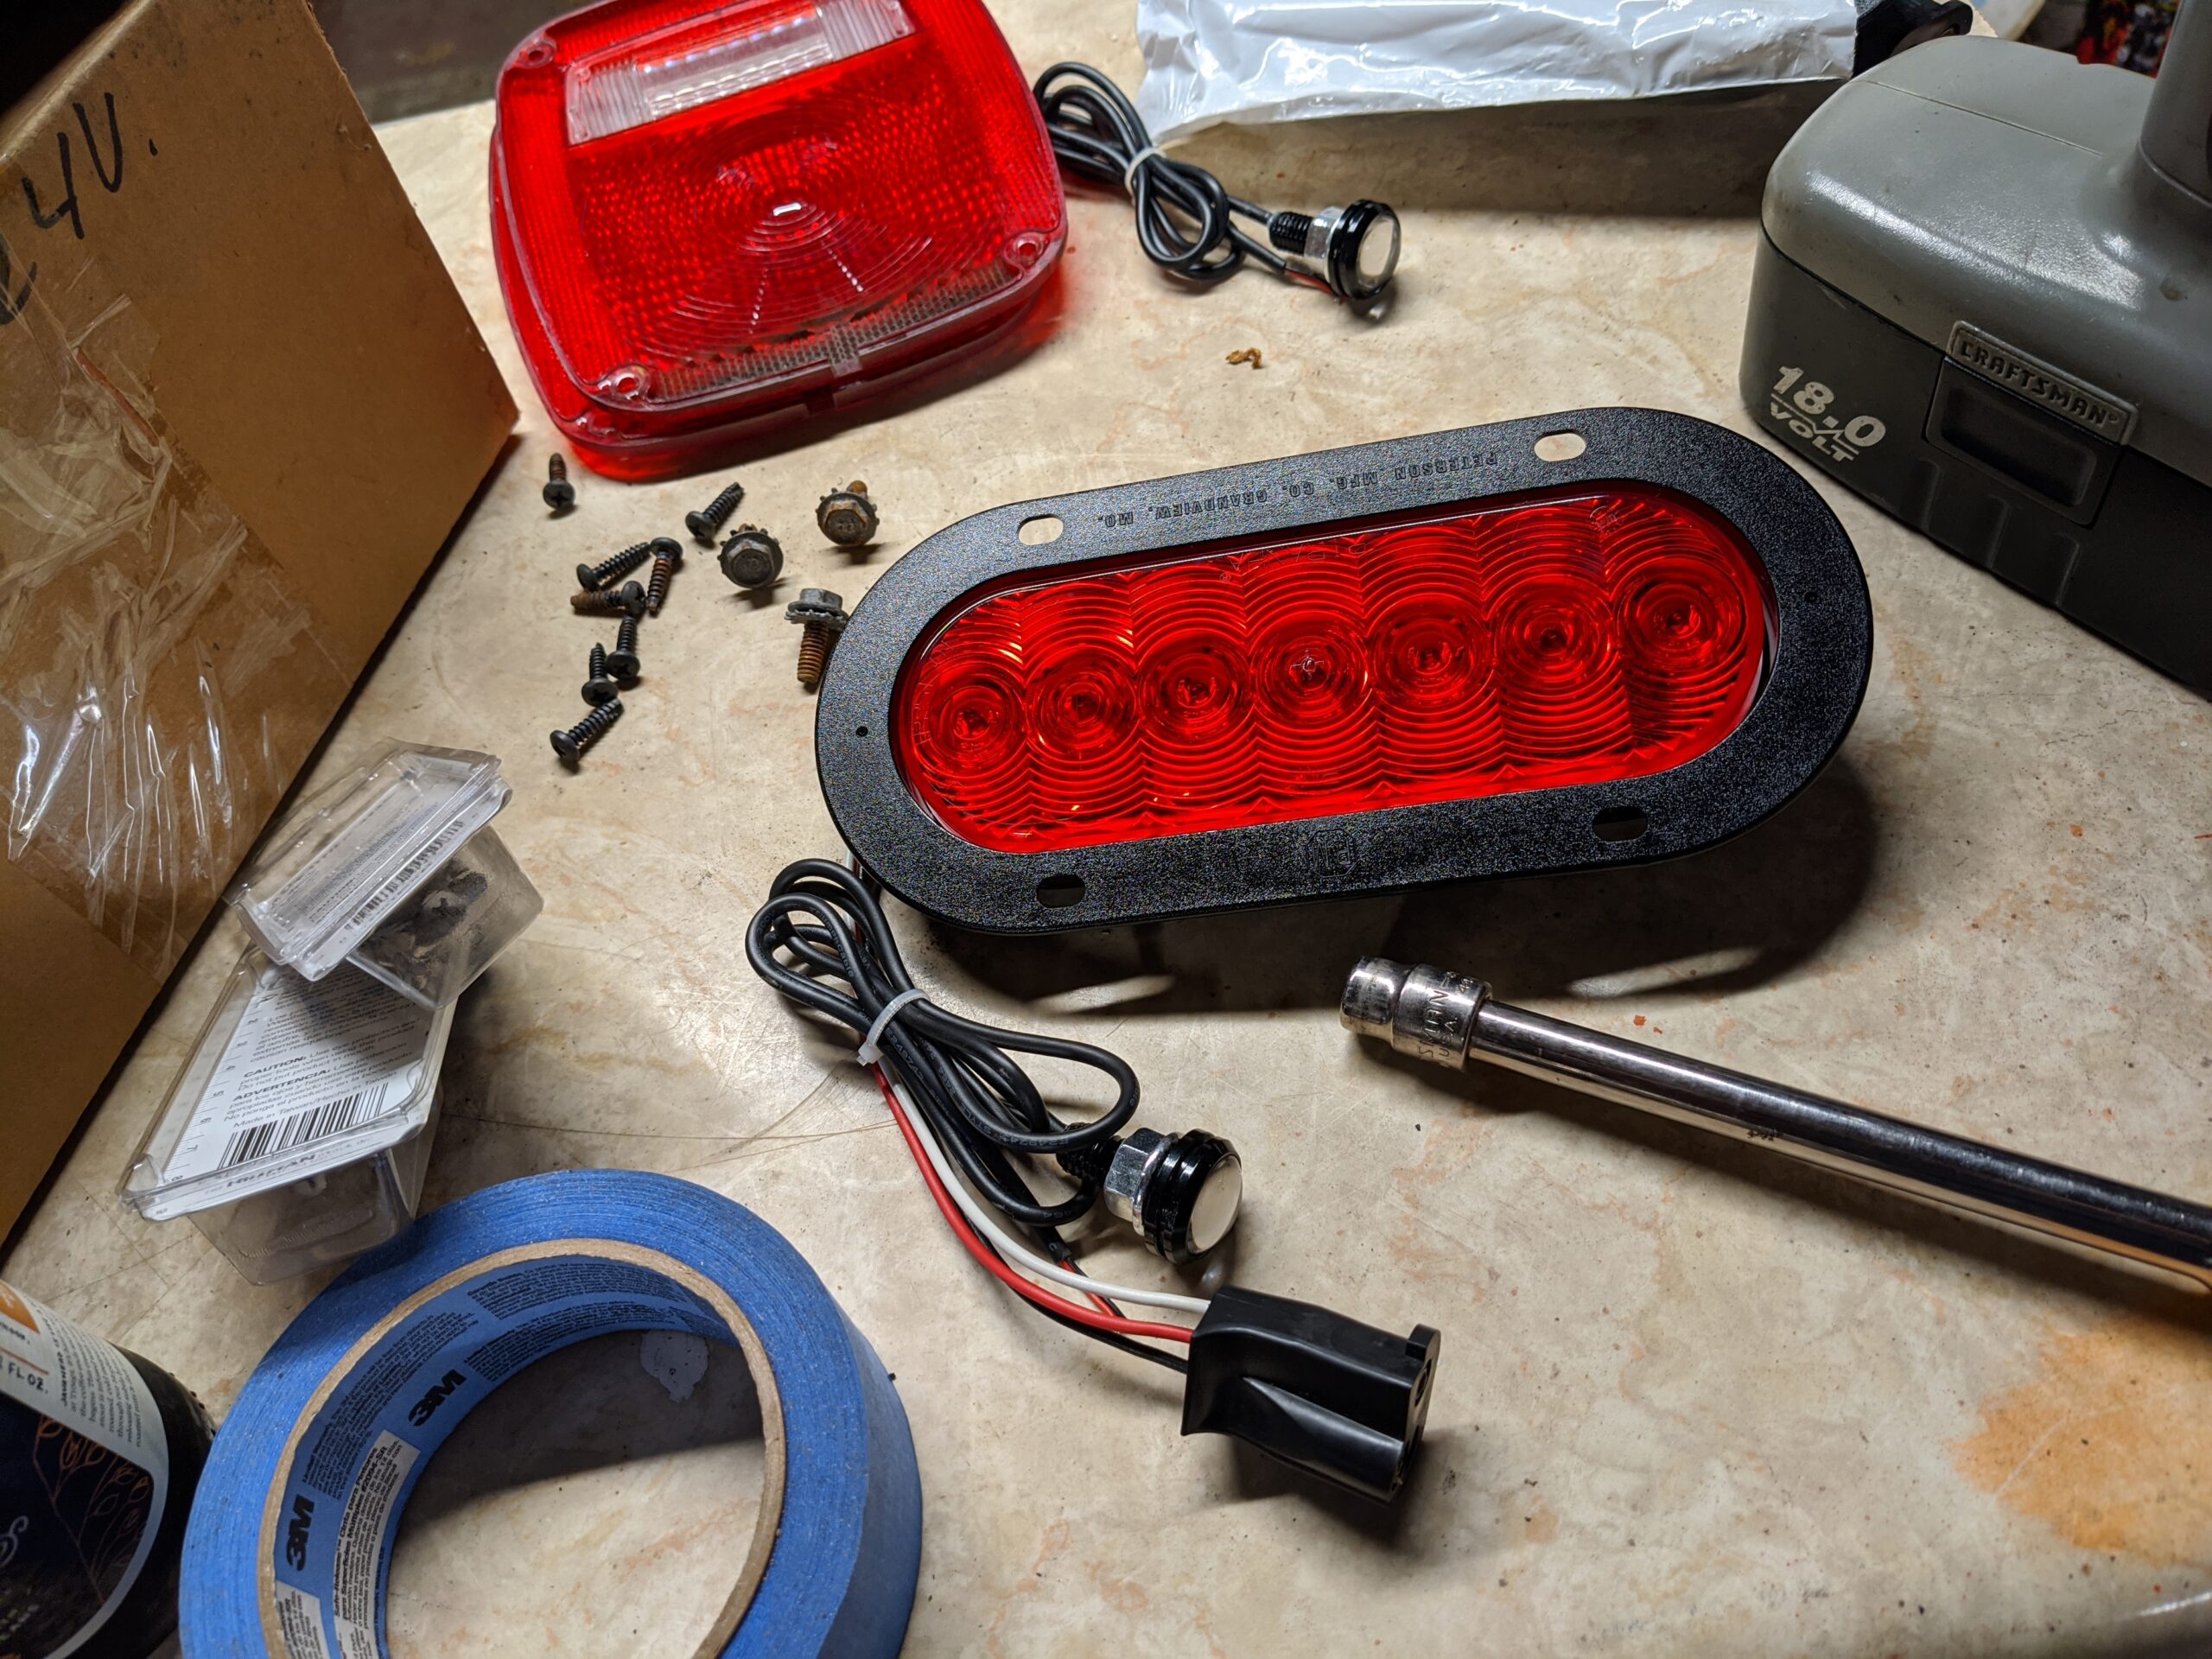 Flush Mounted Tail Lights in the TJ/LJ require commitment.